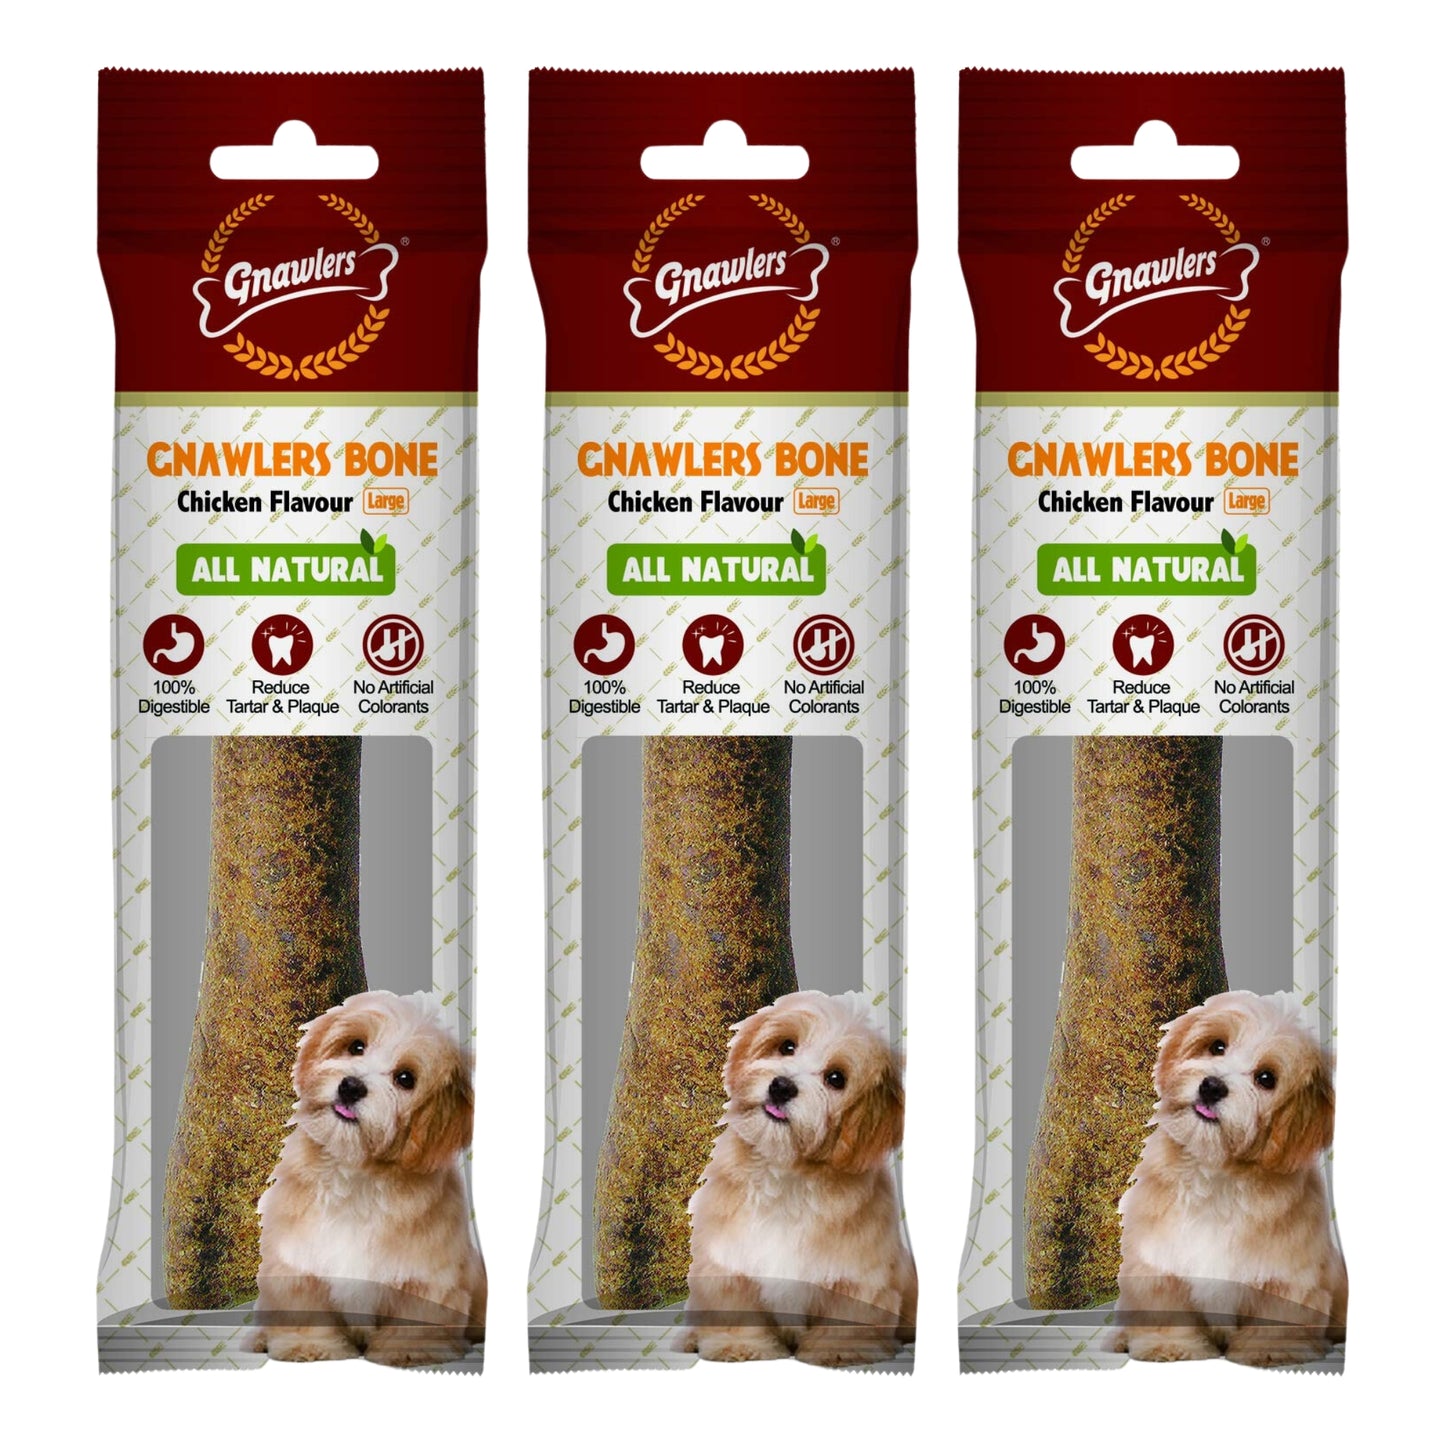 Gnawlers Chicken Bones Adult Dog Treats - 8inch (Large), Pack of 3